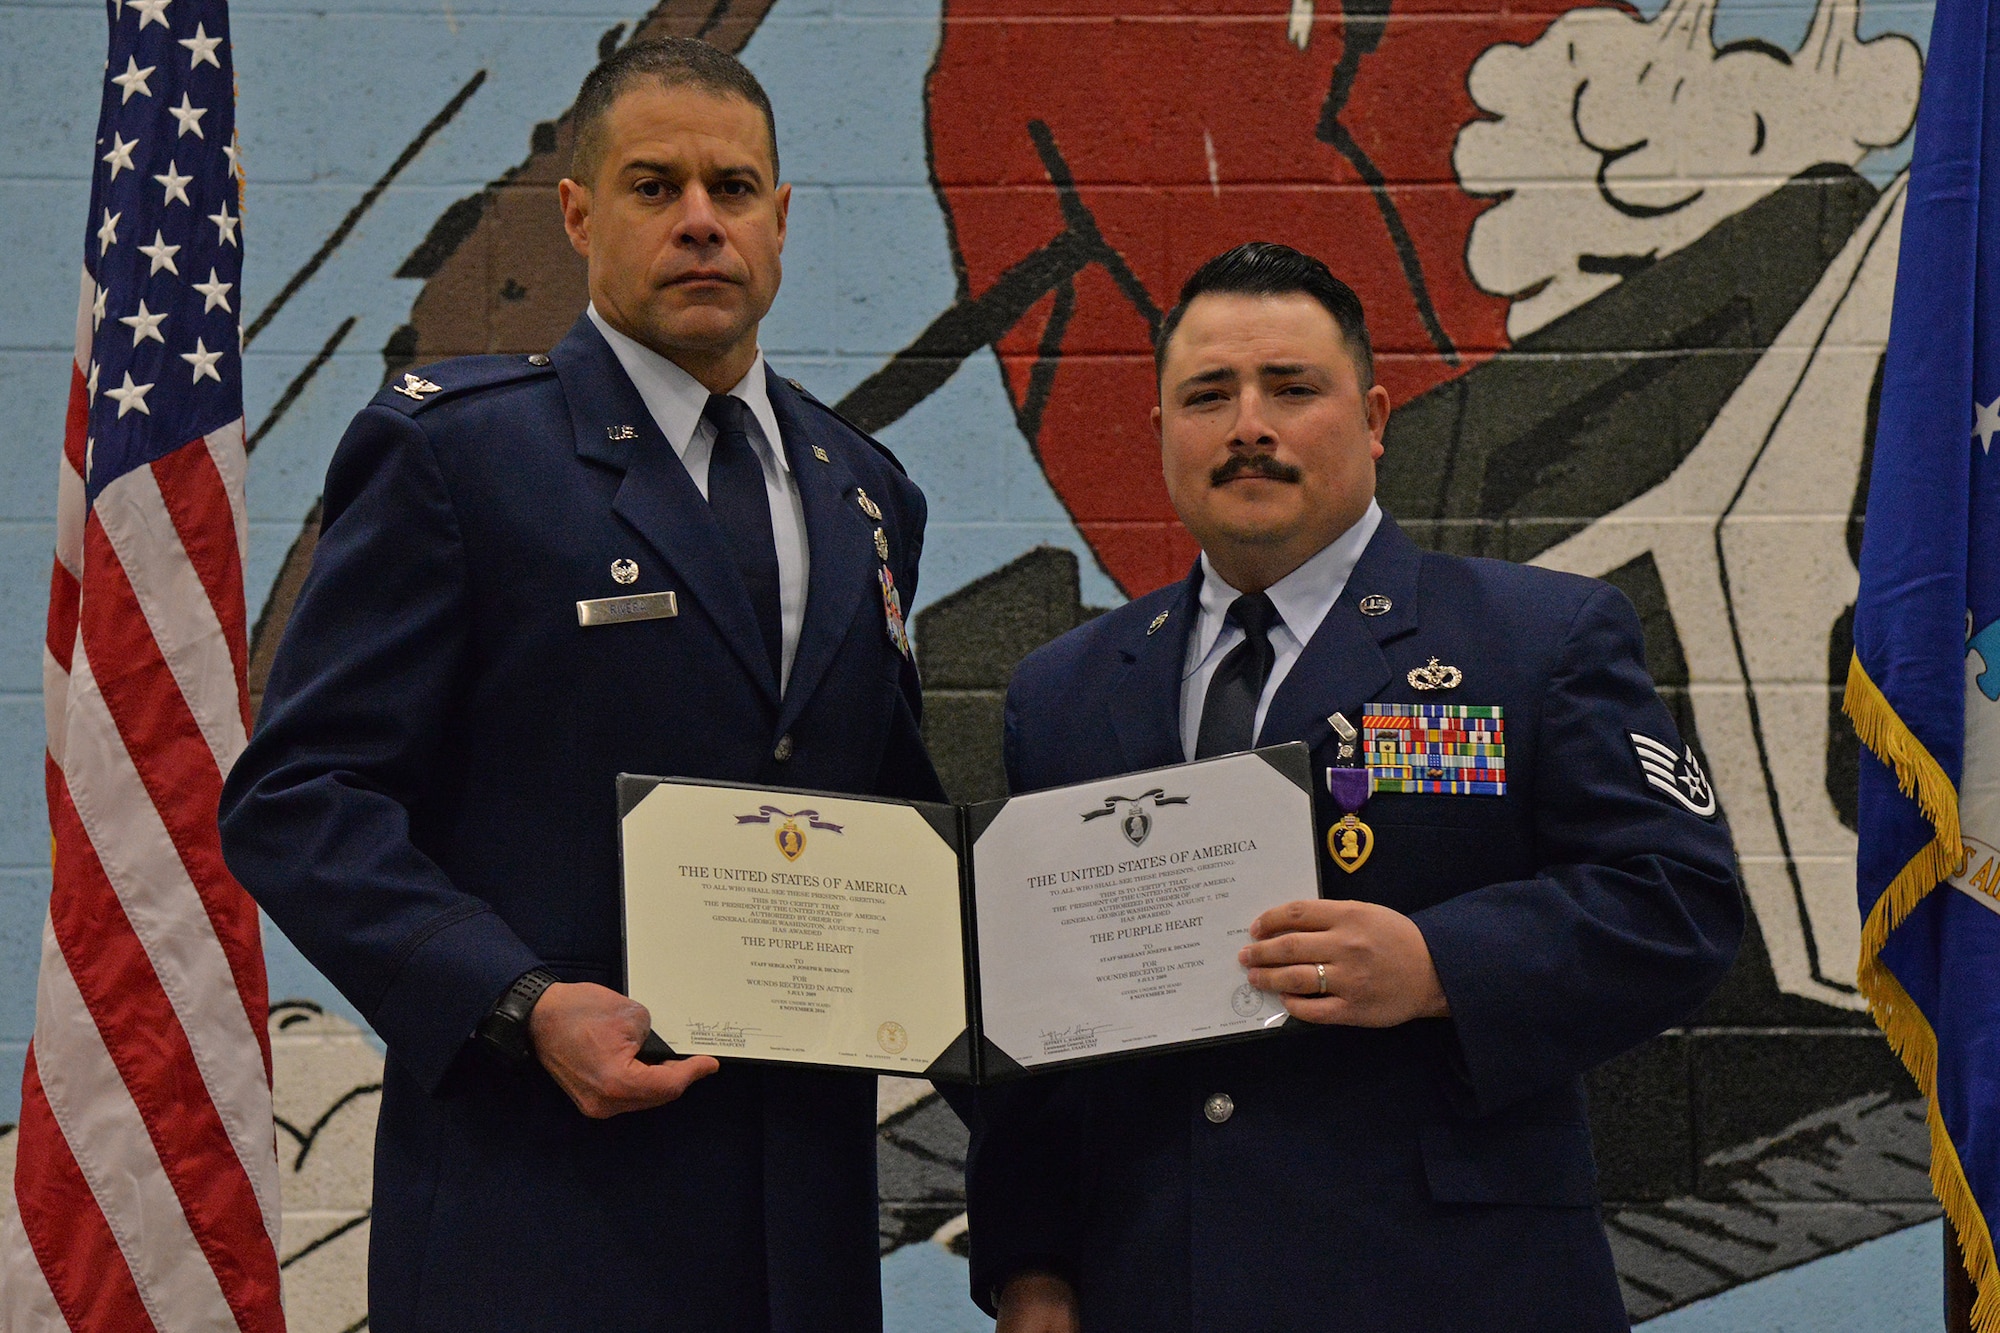 Col. Jose Rivera, 819th RED HORSE Squadron commander, left, and Staff Sgt. Joseph Dickison, 819th RHS heating, ventilation and air conditioning technician, pose for a photo at a Purple Heart medal ceremony Dec. 9, 2016, at Malmstrom Air Force Base, Mont. Dickison was awarded the Purple Heart for combat wounds received in Afghanistan in July 2009. (U.S. Air Force photo/Airman 1st Class Daniel Brosam)